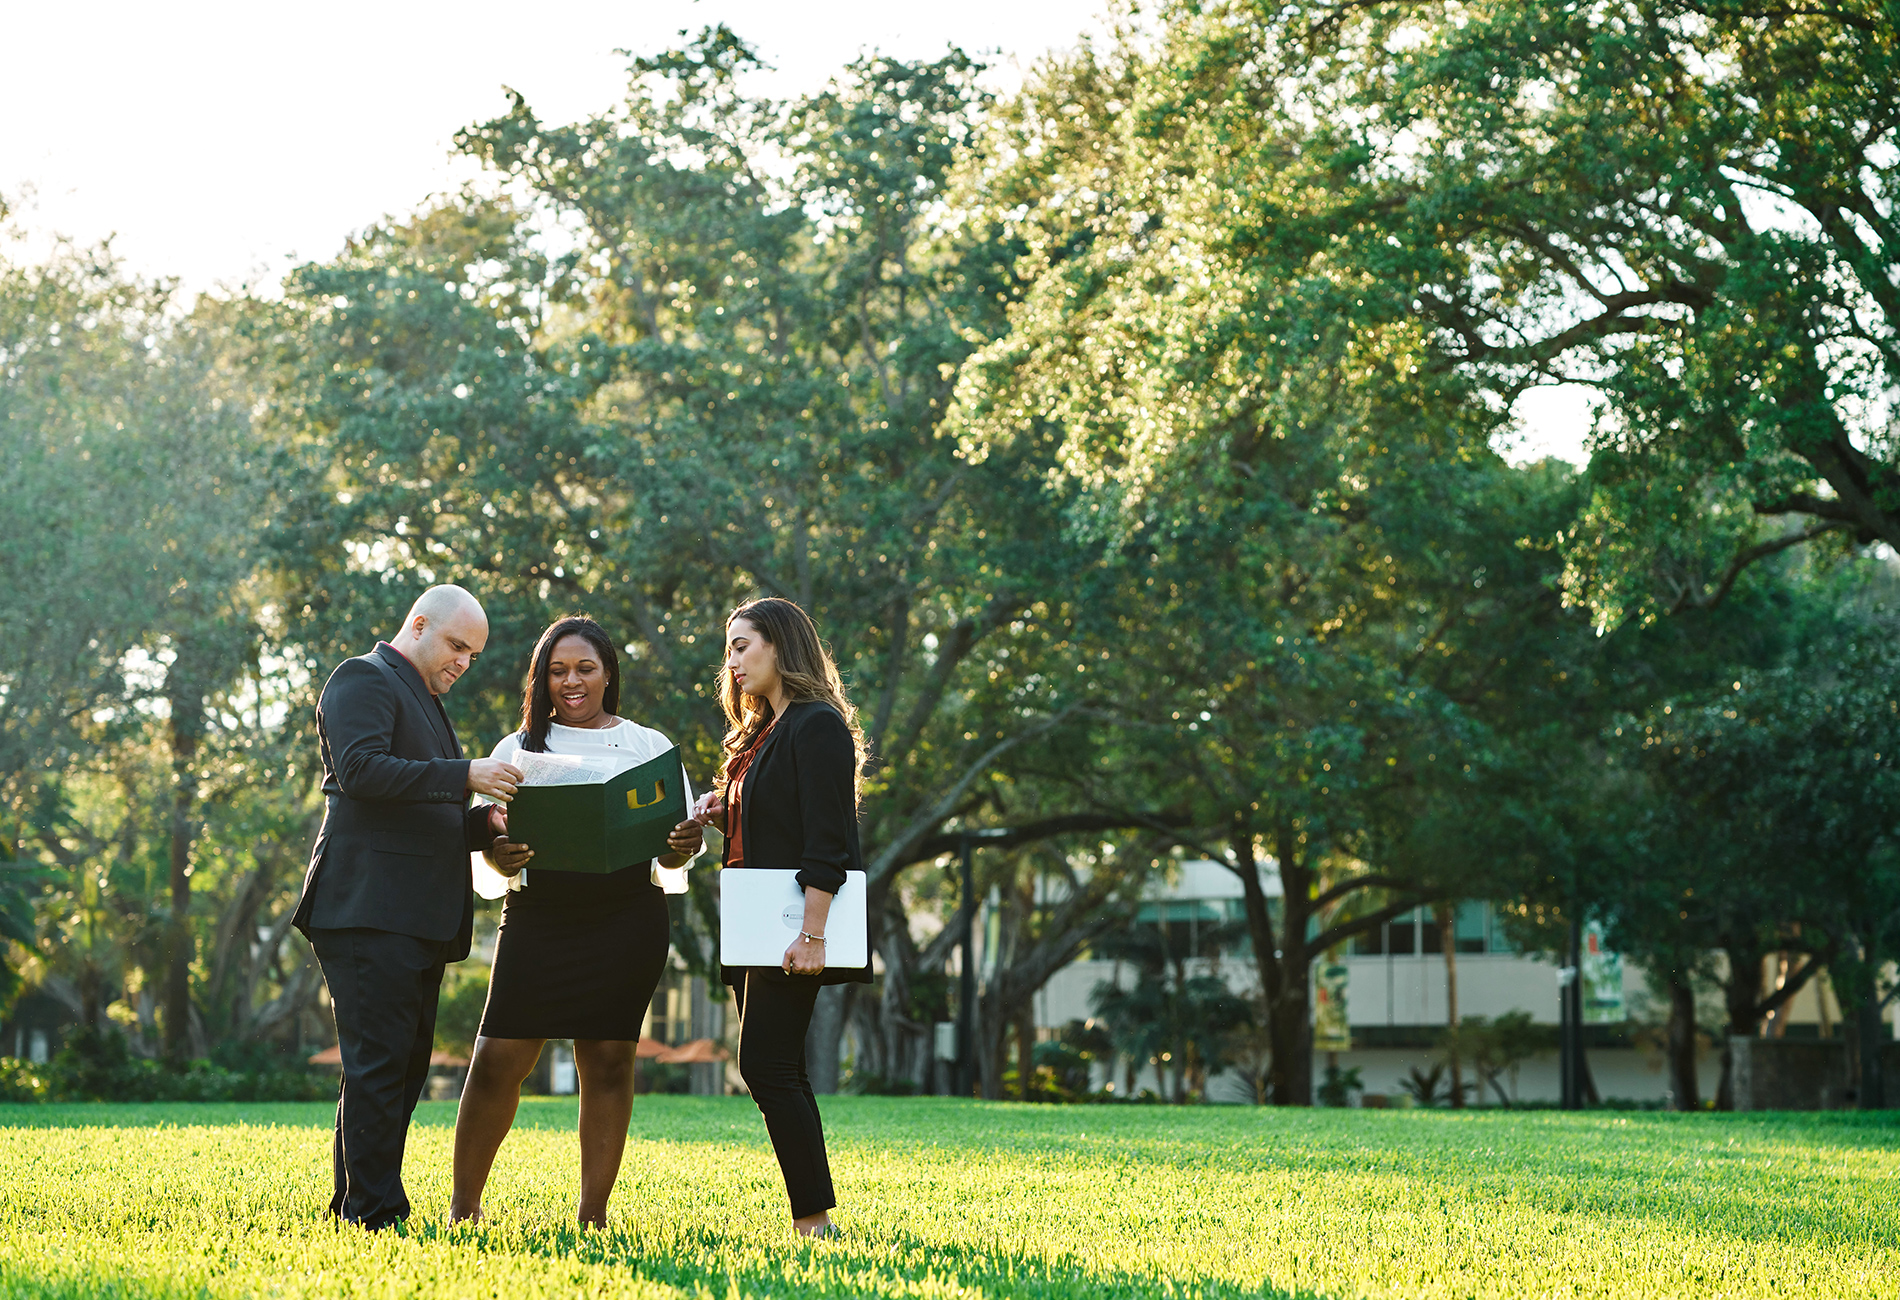 Three professional students meet outdoors on campus